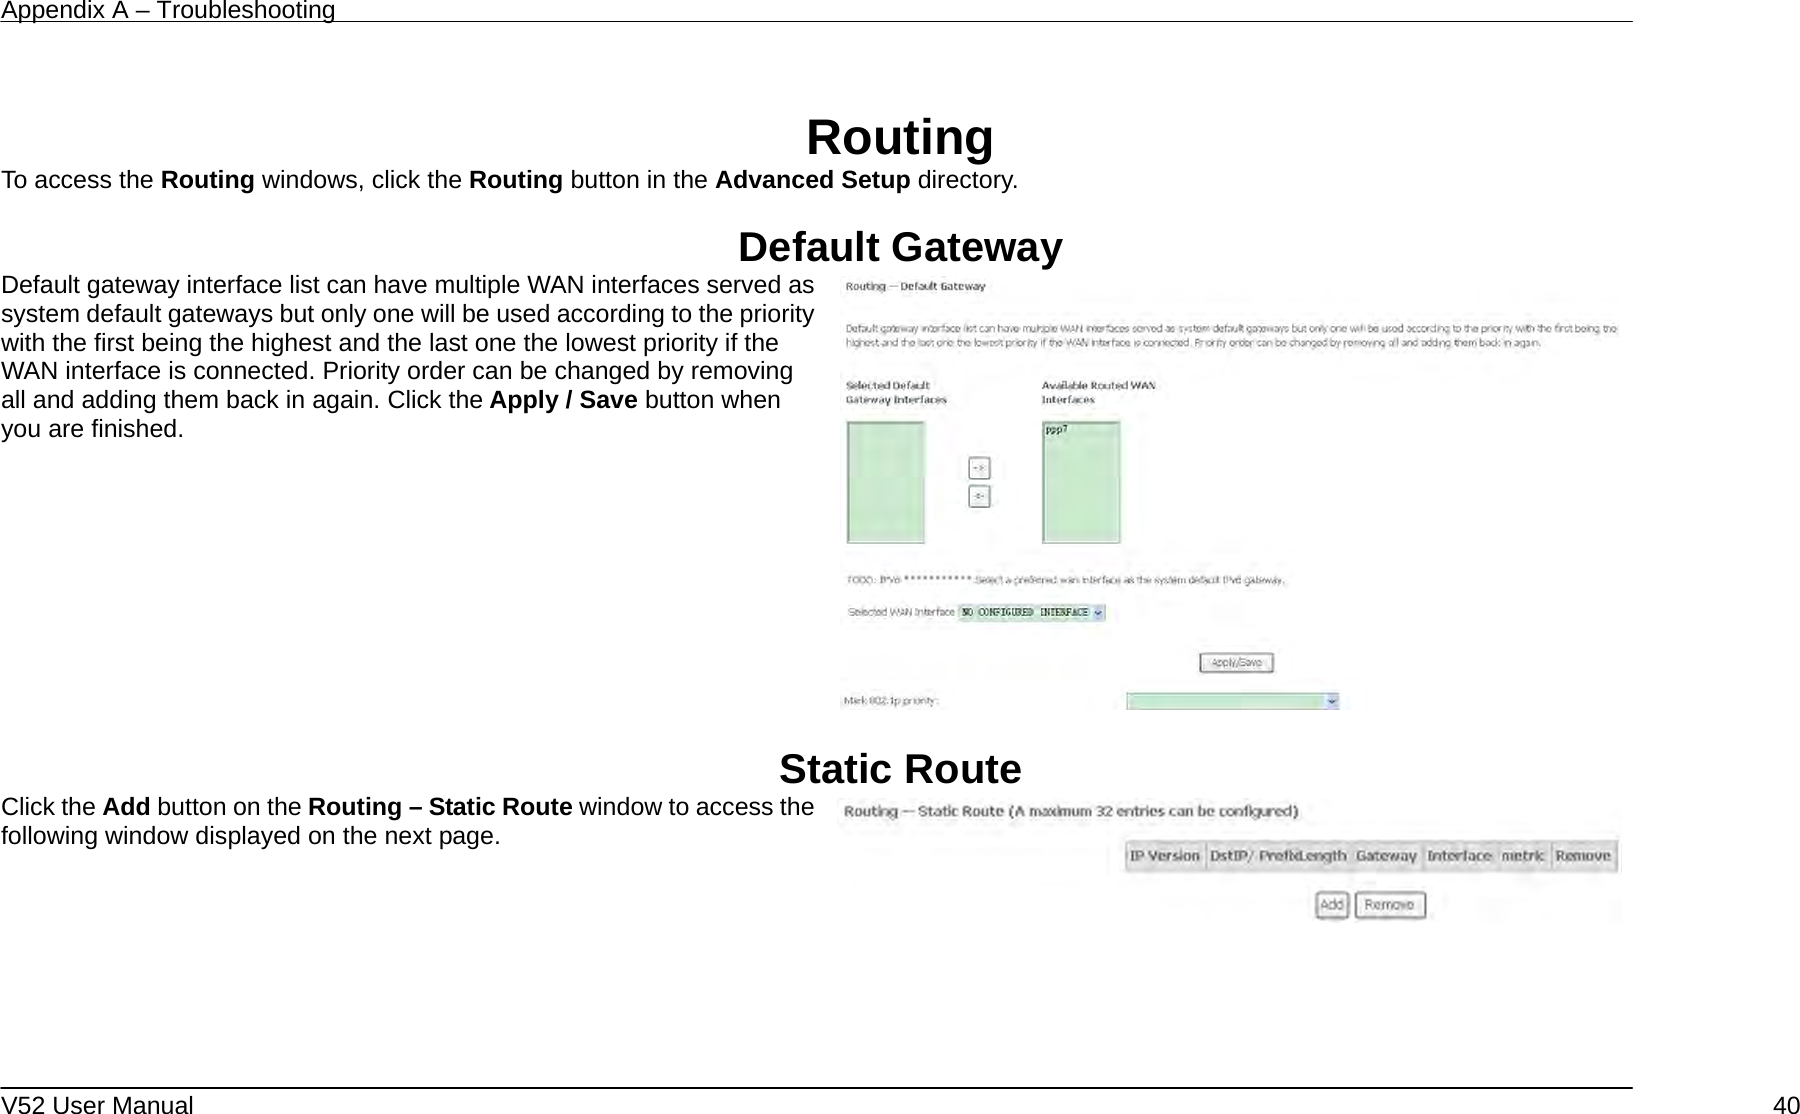 Appendix A – Troubleshooting   V52 User Manual    40 Routing To access the Routing windows, click the Routing button in the Advanced Setup directory.  Default Gateway Default gateway interface list can have multiple WAN interfaces served as system default gateways but only one will be used according to the priority with the first being the highest and the last one the lowest priority if the WAN interface is connected. Priority order can be changed by removing all and adding them back in again. Click the Apply / Save button when you are finished.     Static Route Click the Add button on the Routing – Static Route window to access the following window displayed on the next page.     